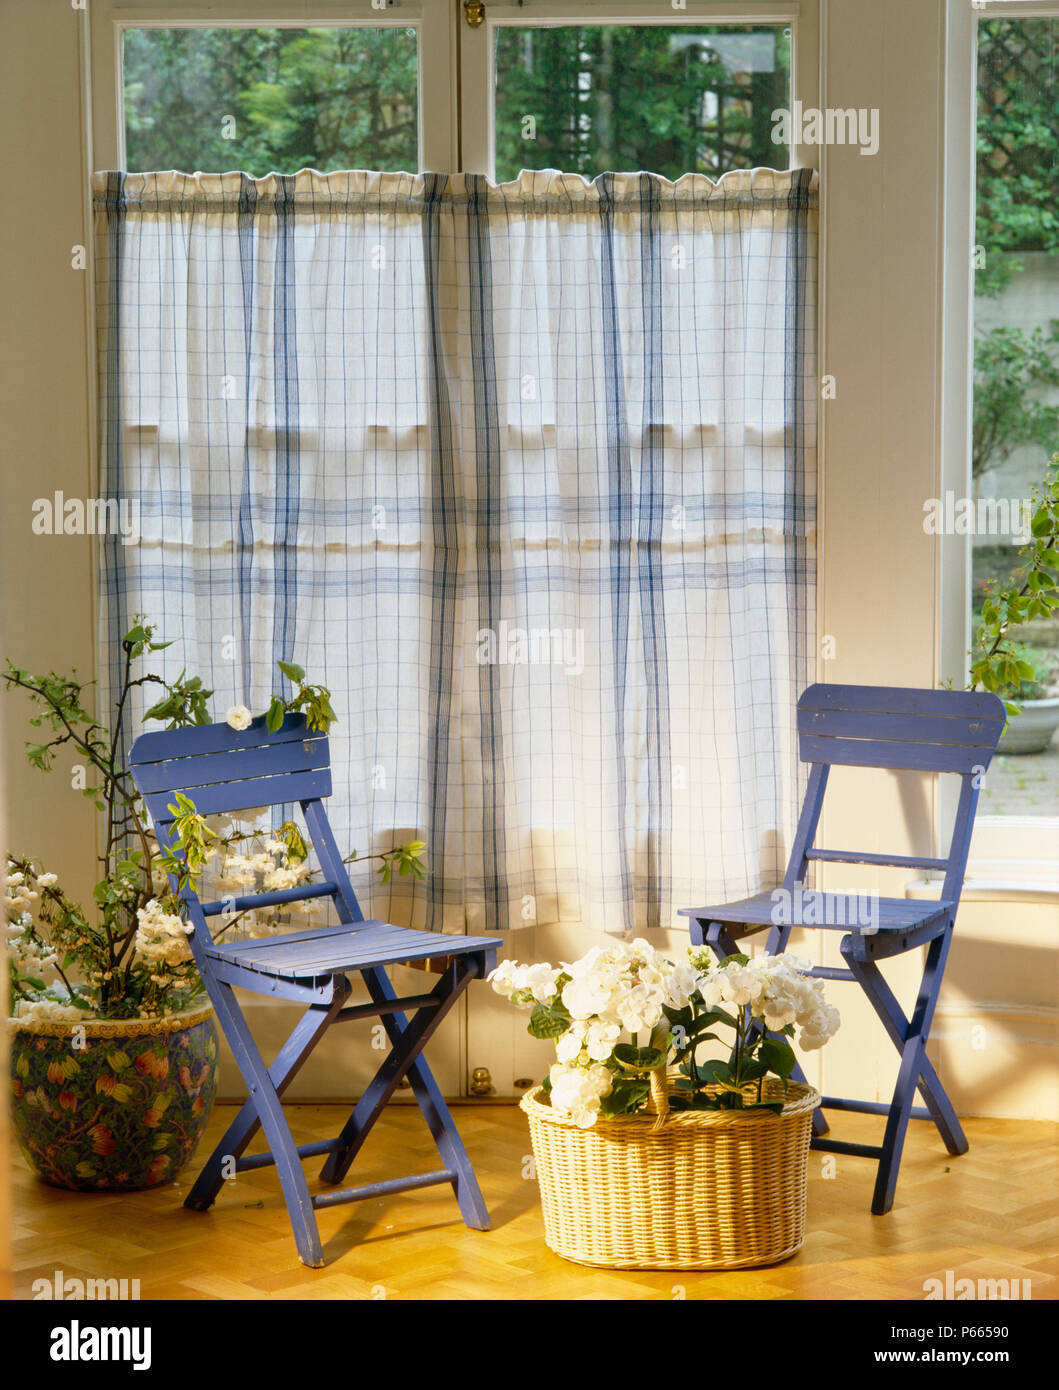 Blue Painted Wooden Chairs In Front Of Windows With Blue Checked